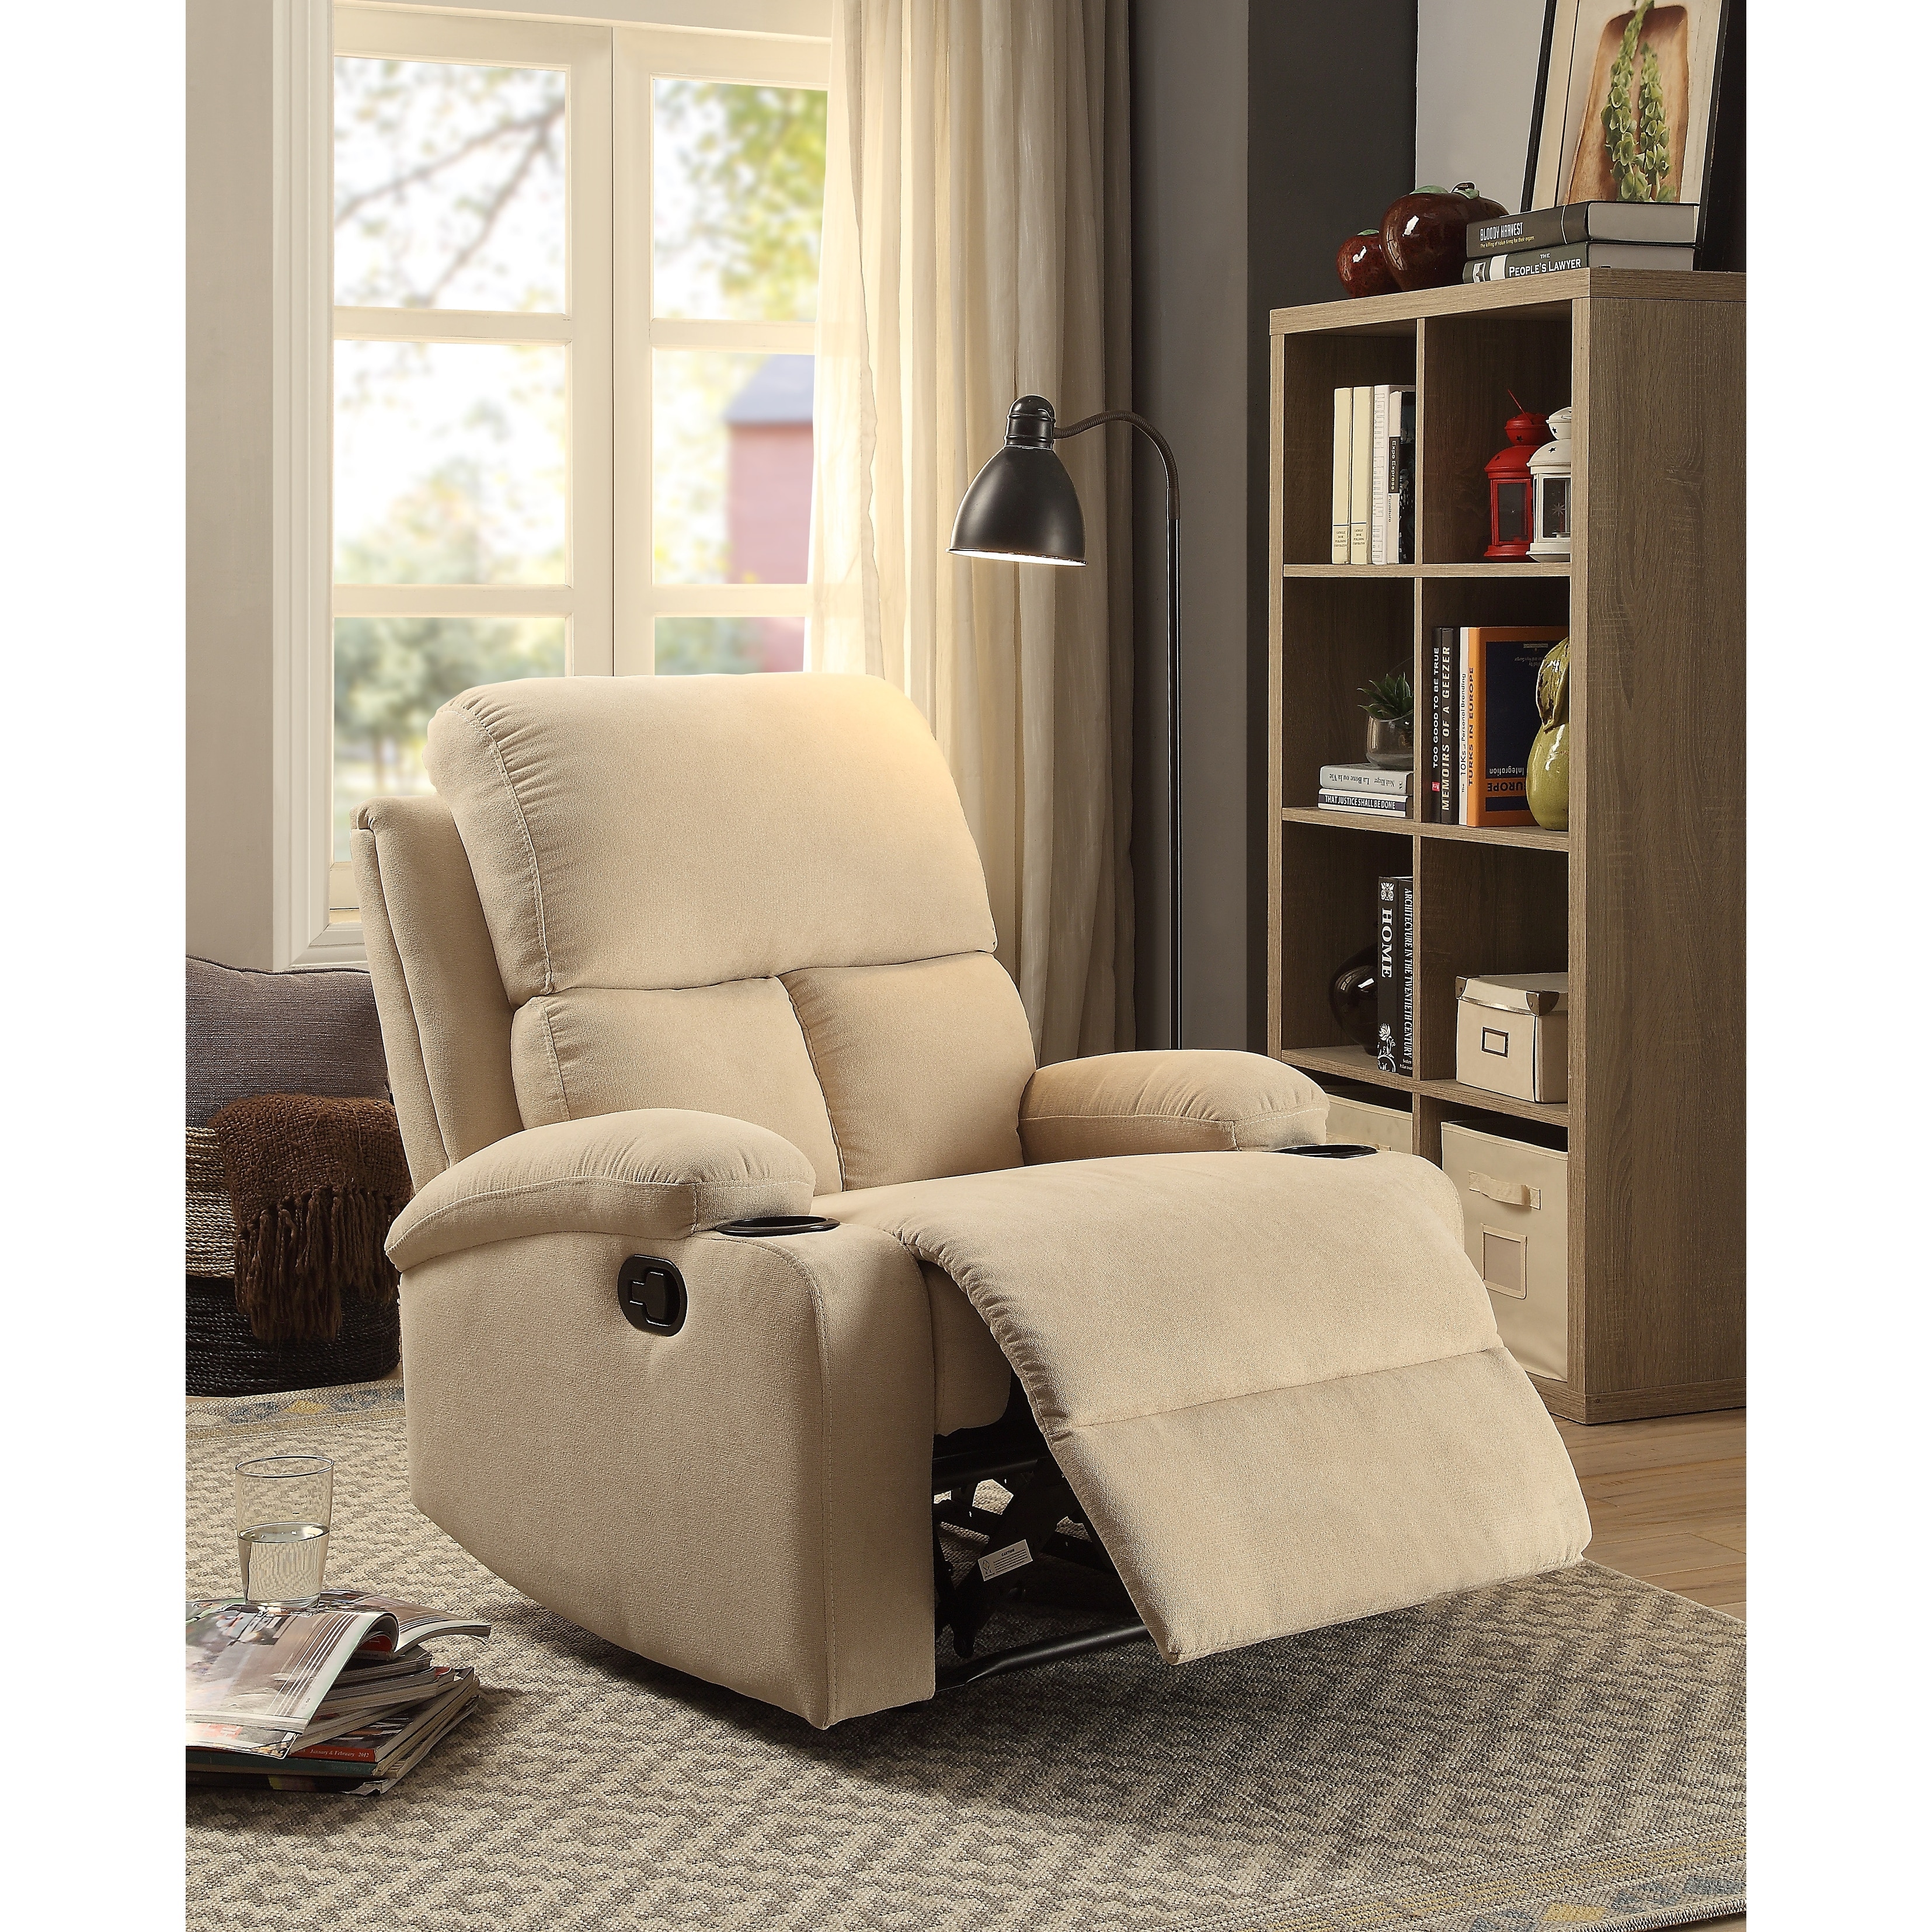 https://ak1.ostkcdn.com/images/products/is/images/direct/5e91de96292d7e4164bb0420aef7bbb1ed088520/Beige-Vintage-Motion-Recliner-with-Tight-Back-%26-Seat-Cushions-and-Pillow-Top-Arm-%26-Cup-Holder.jpg